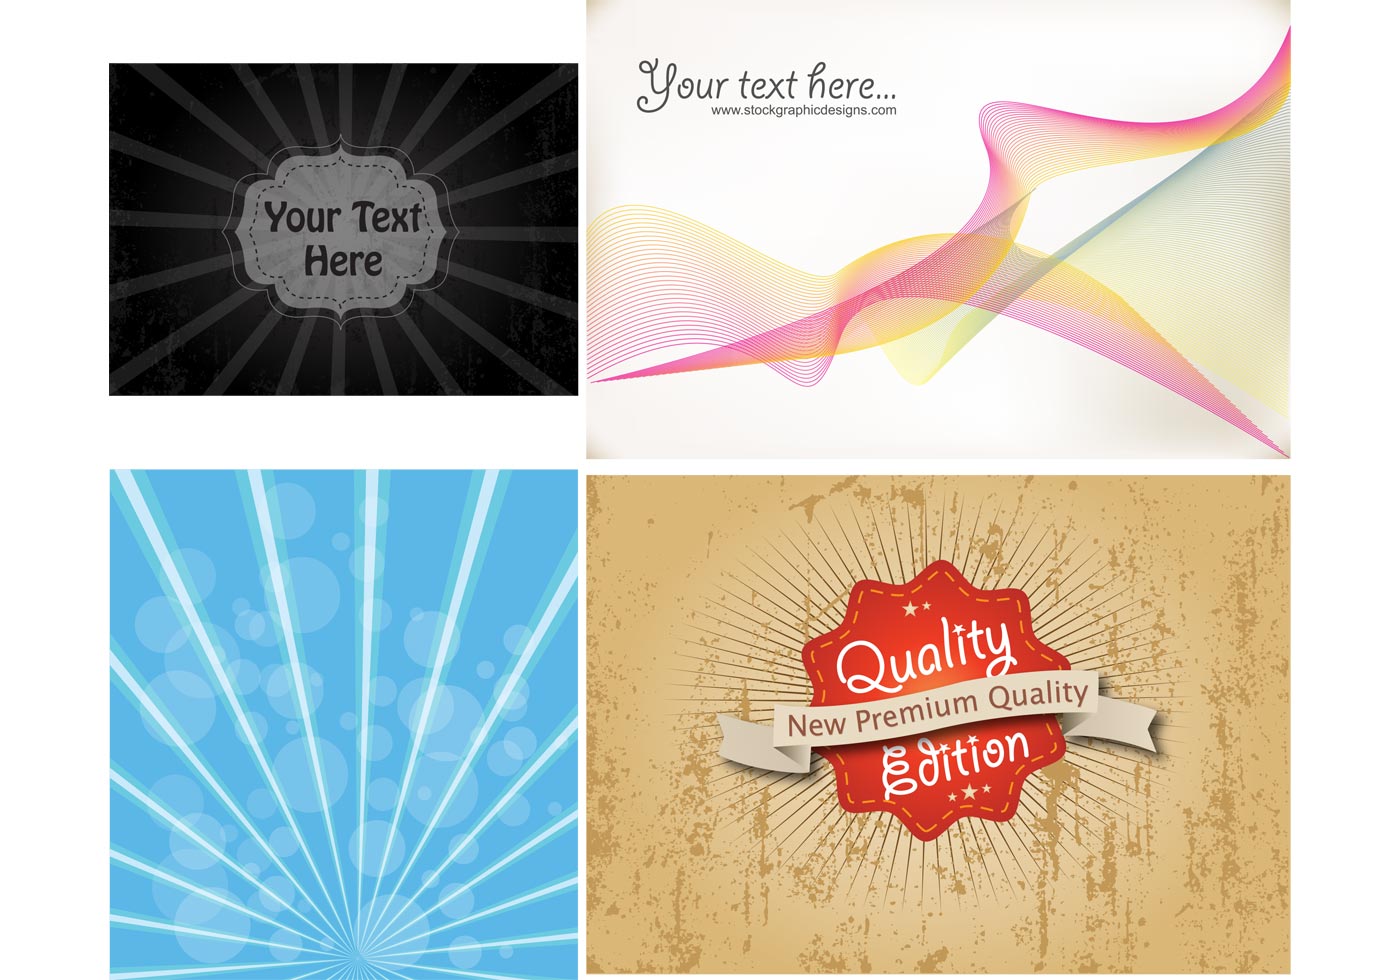 Download Free Vector Backgrounds - Download Free Vector Art, Stock Graphics & Images